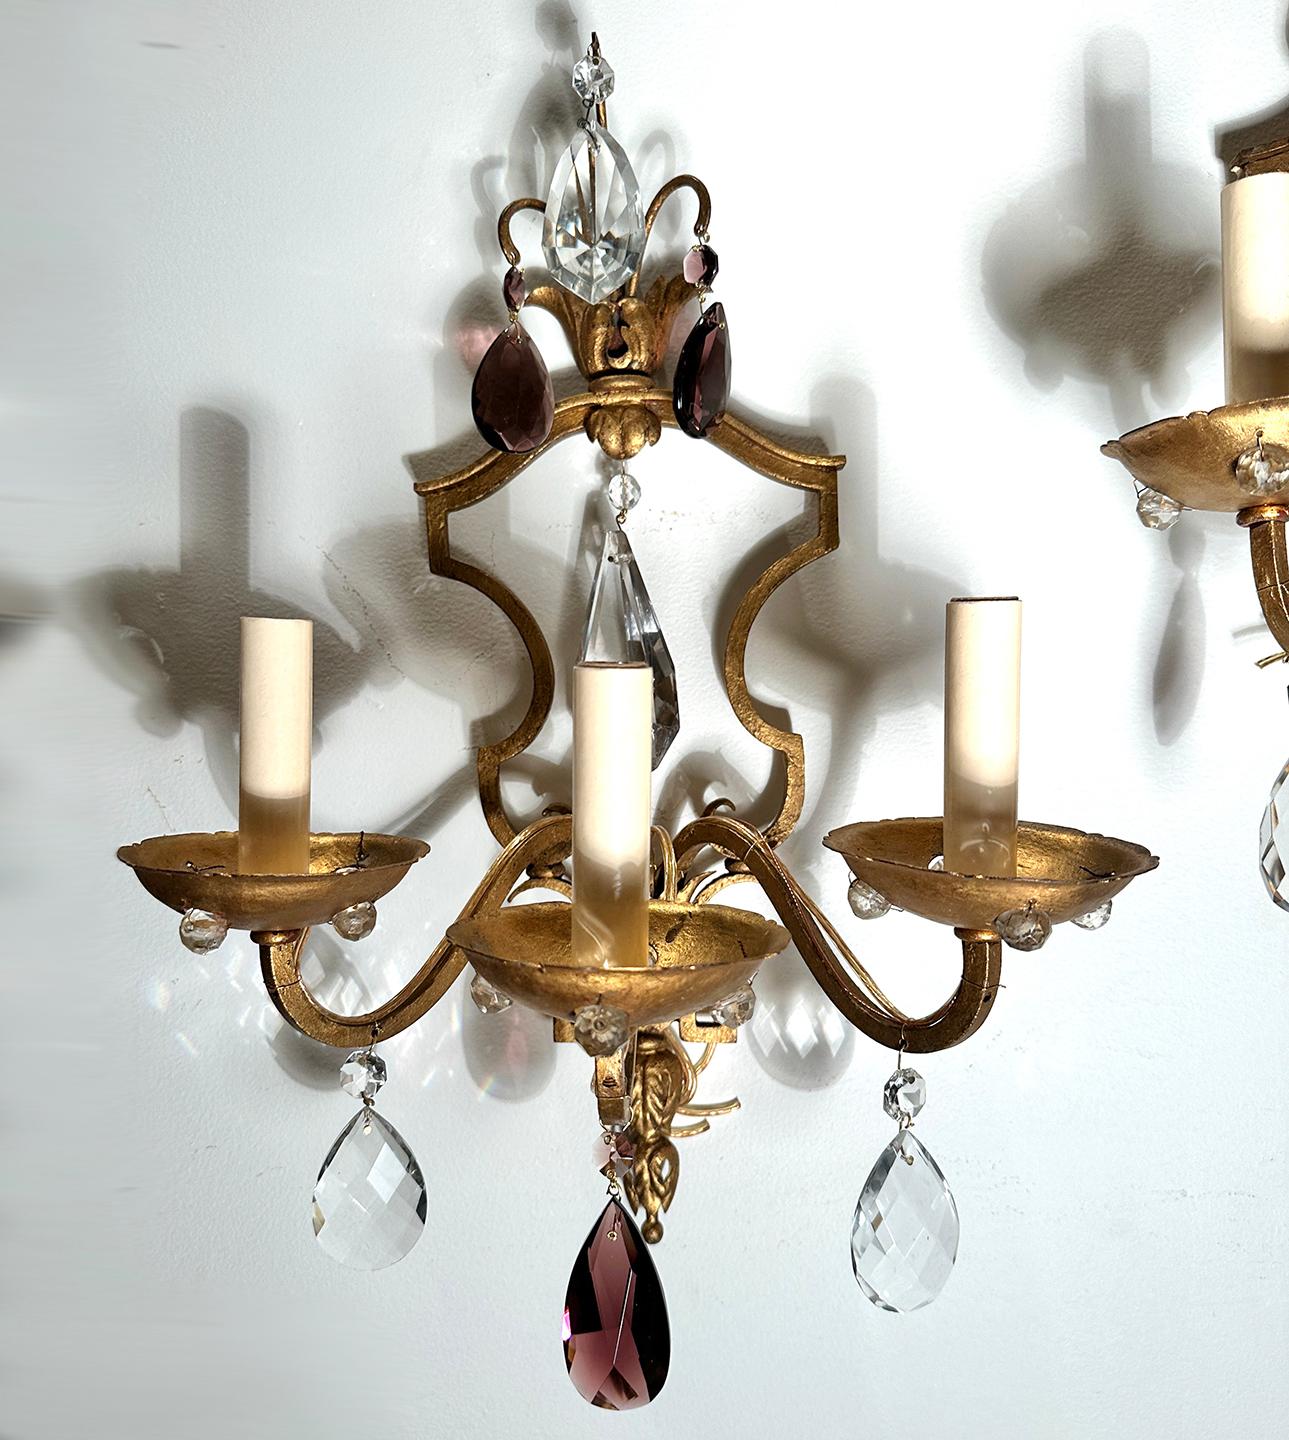 Pair of circa 1930's French gilt metal 3 light sconces with crystals.

Measurements:
Height: 19